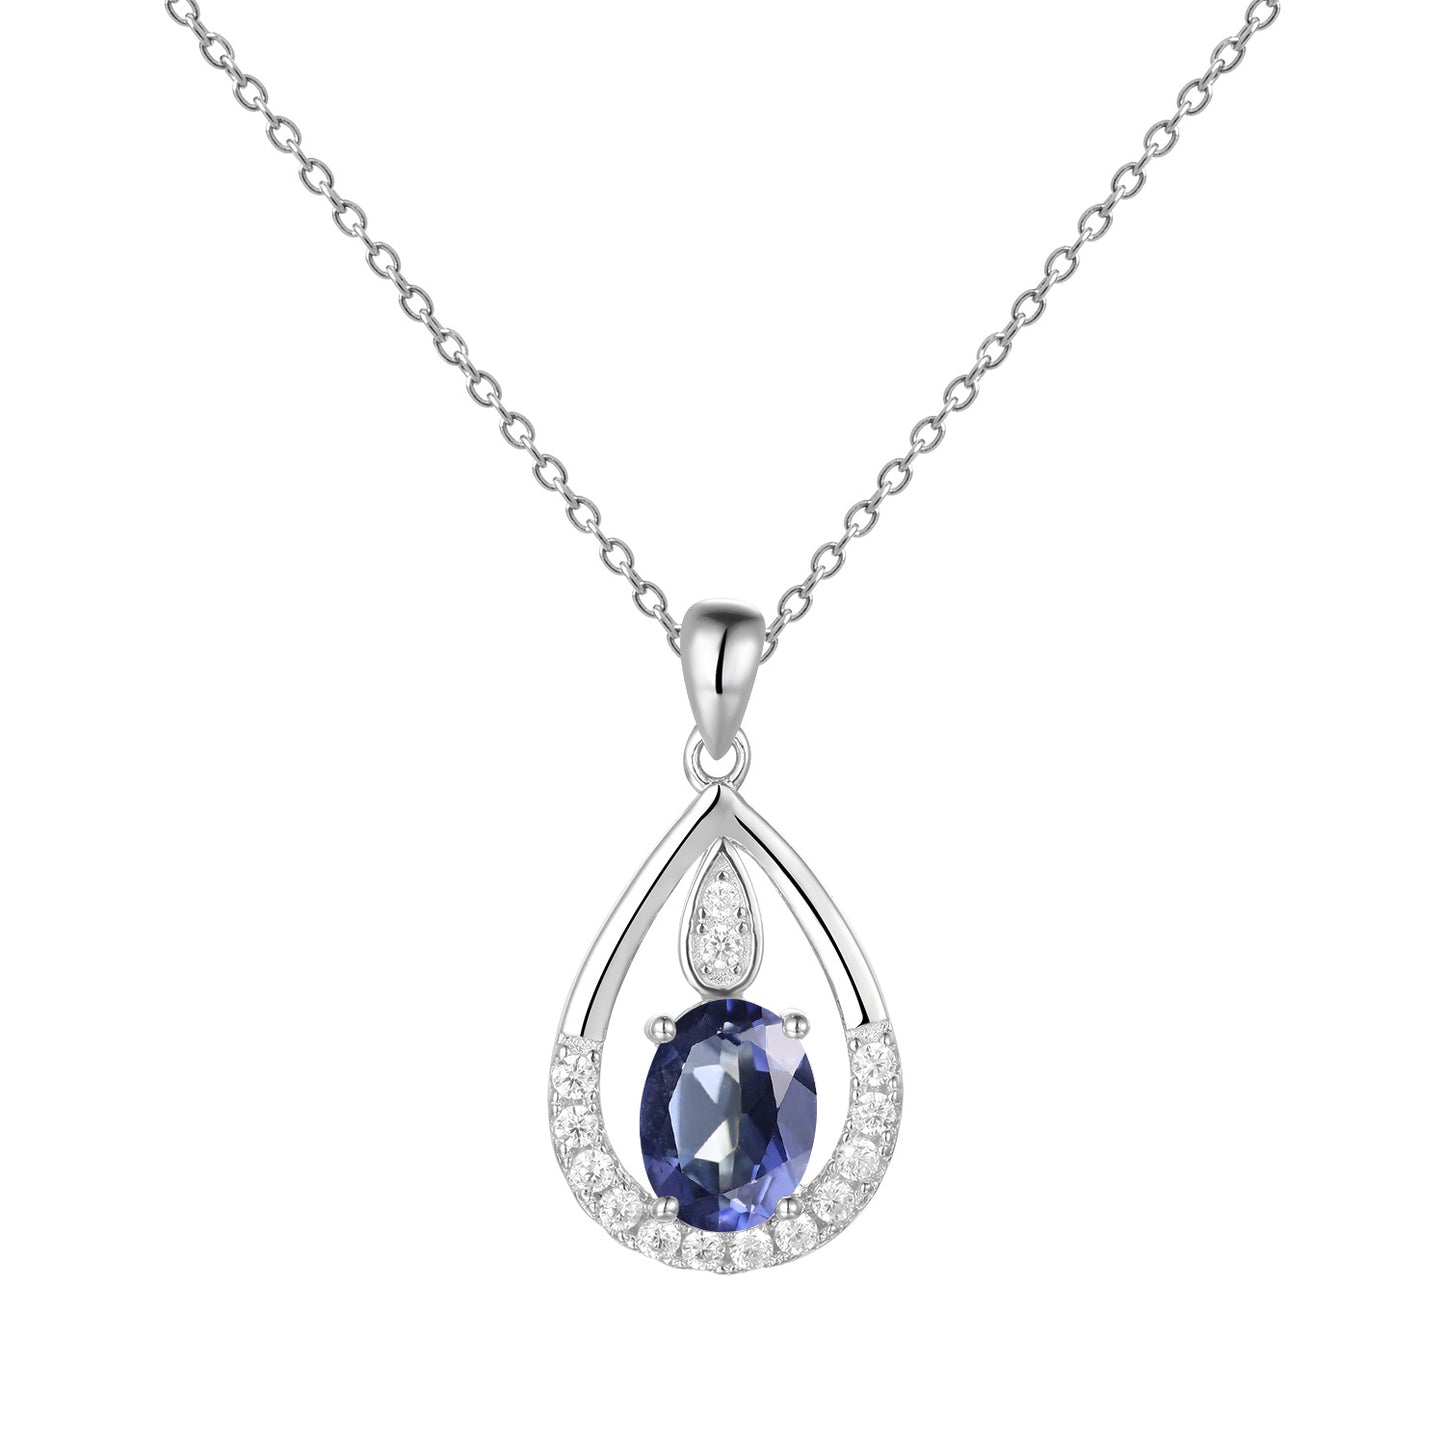 Water Droplet Pendant Oval Natural Gemstone Silver Necklace